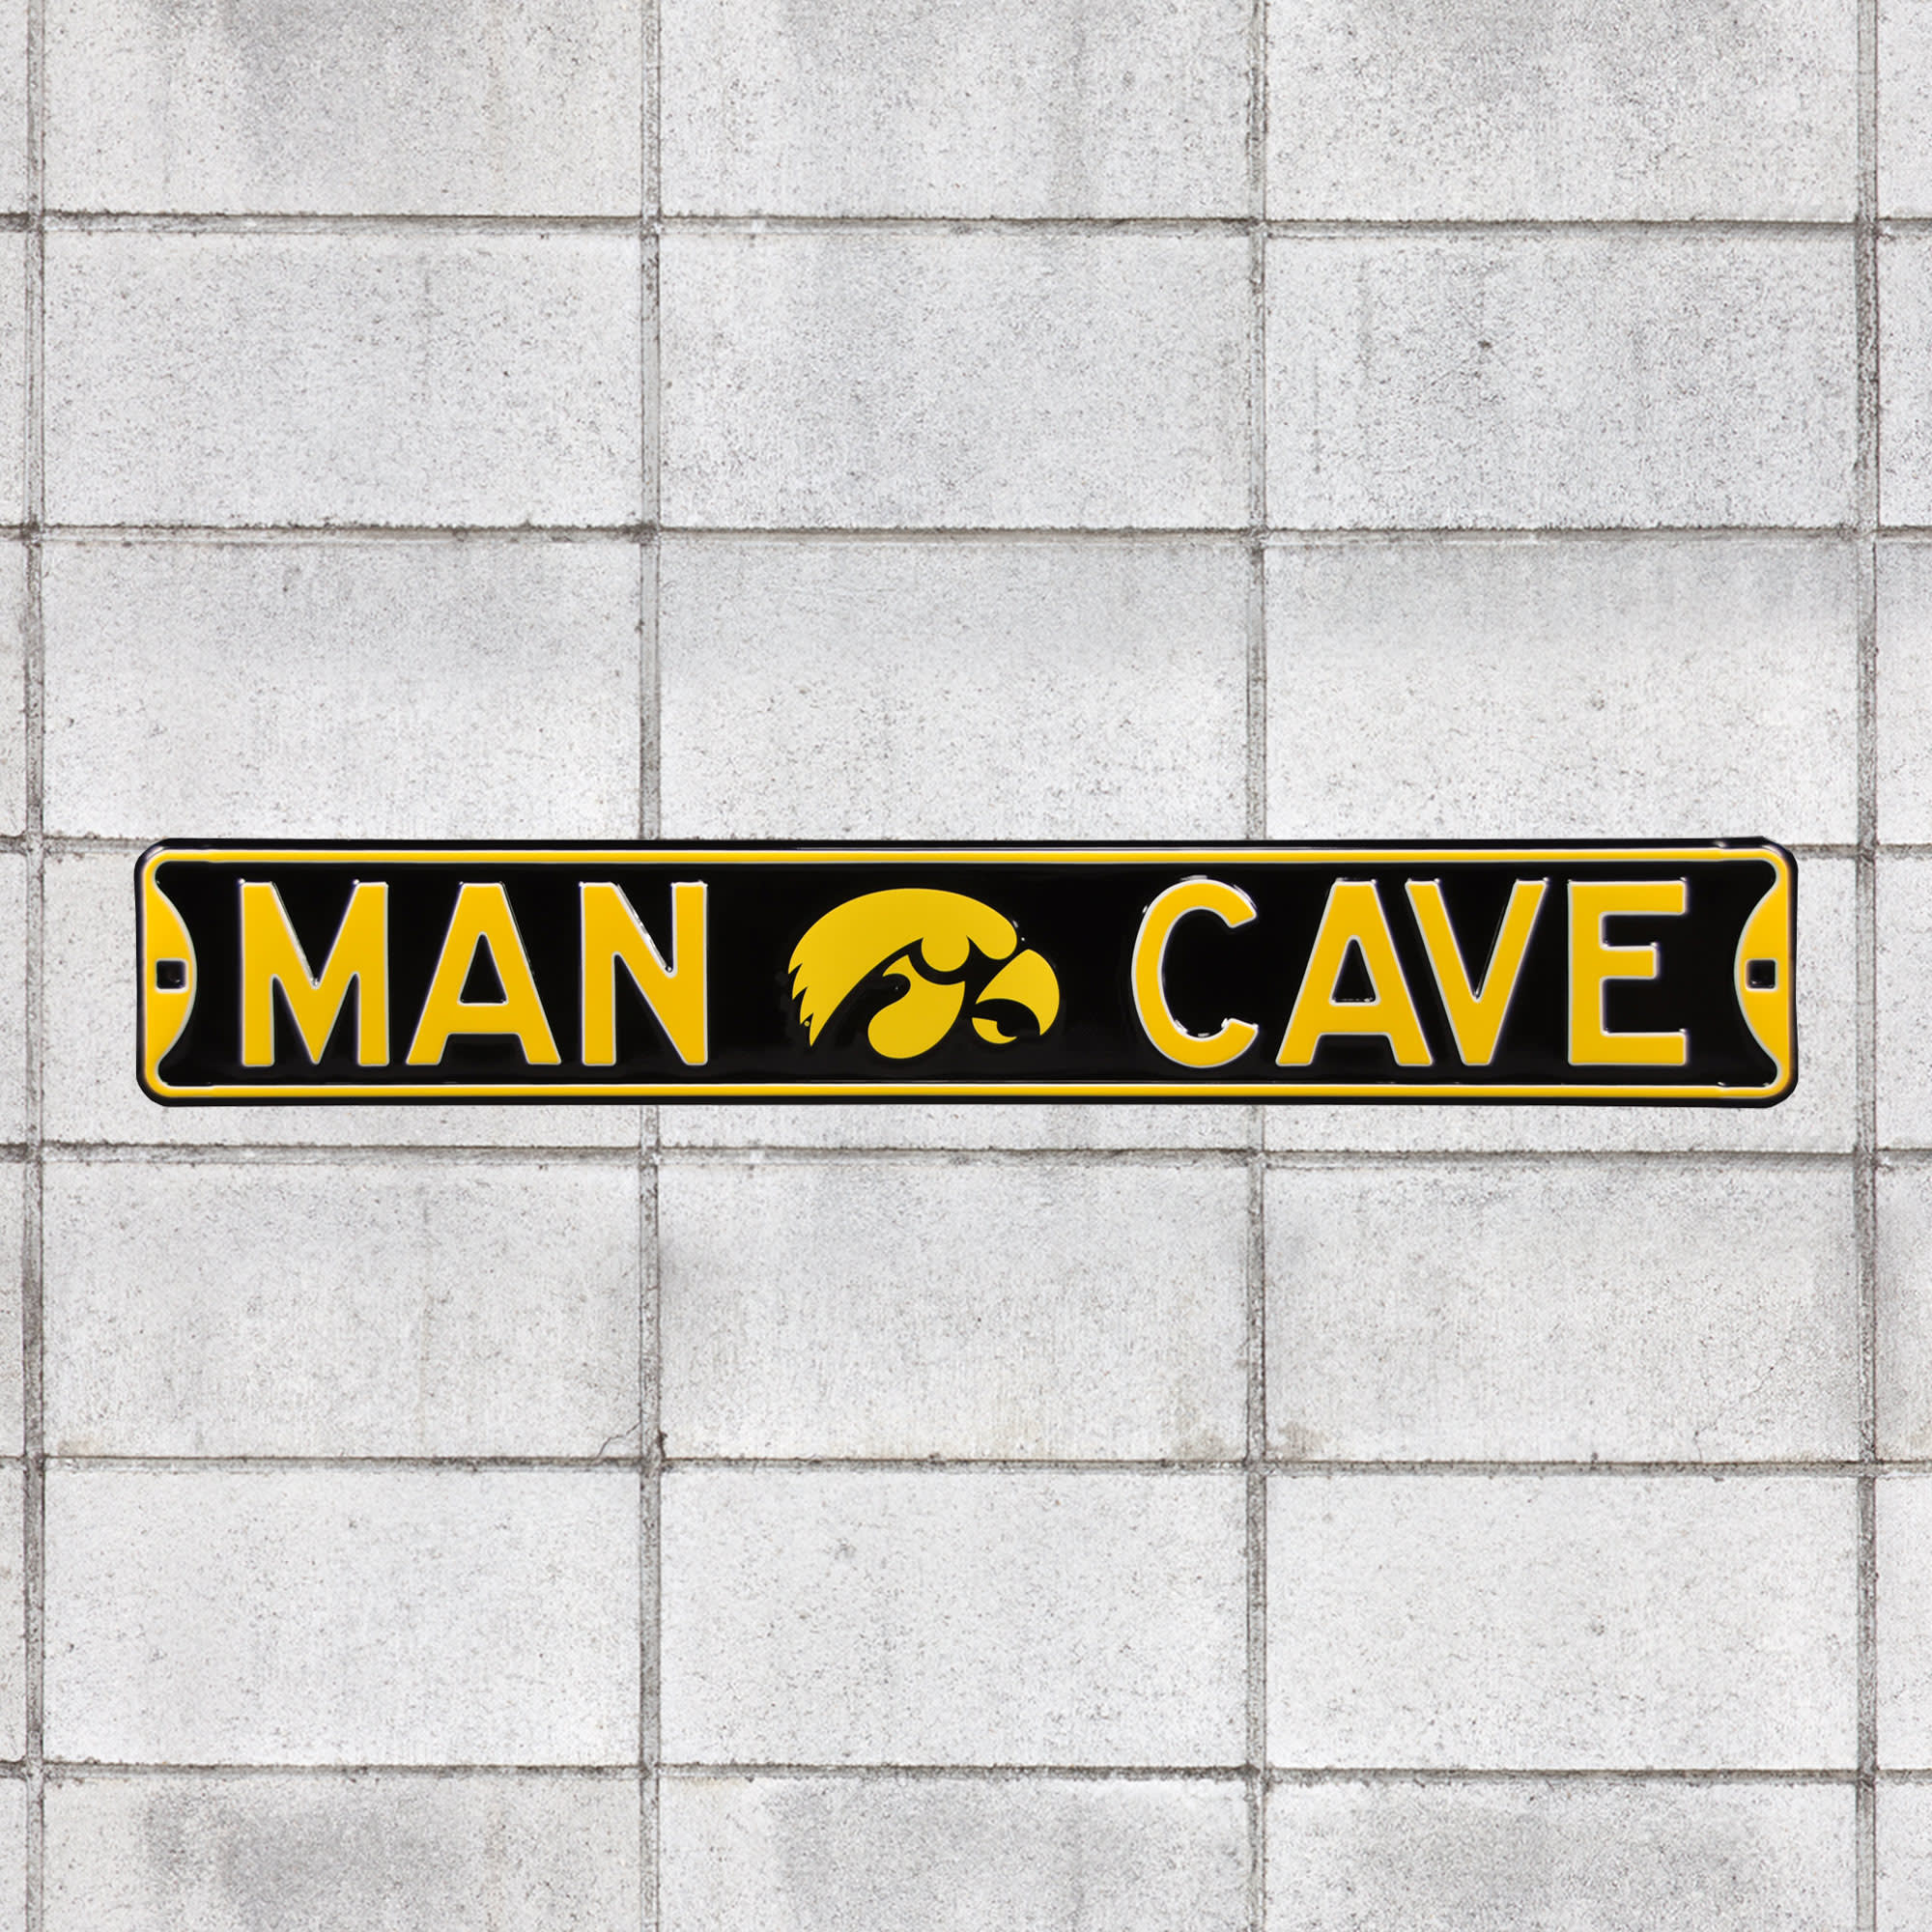 Iowa Hawkeyes: Man Cave - Officially Licensed Metal Street Sign 36.0"W x 6.0"H by Fathead | 100% Steel